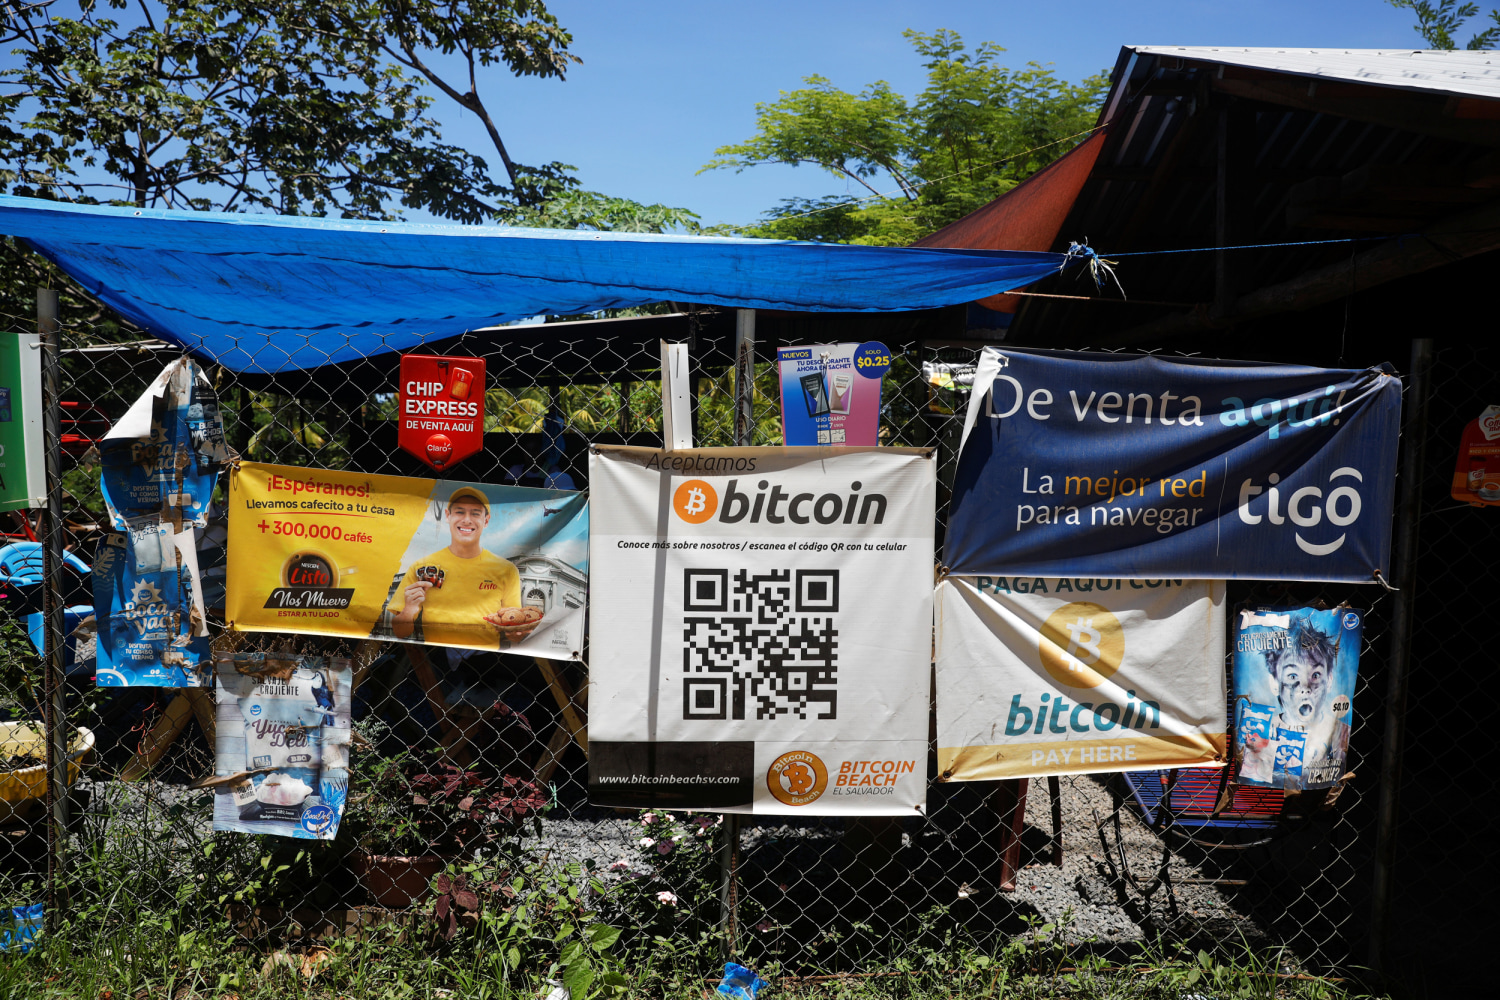 Is El Salvador's crypto push working? Experts urge caution amid